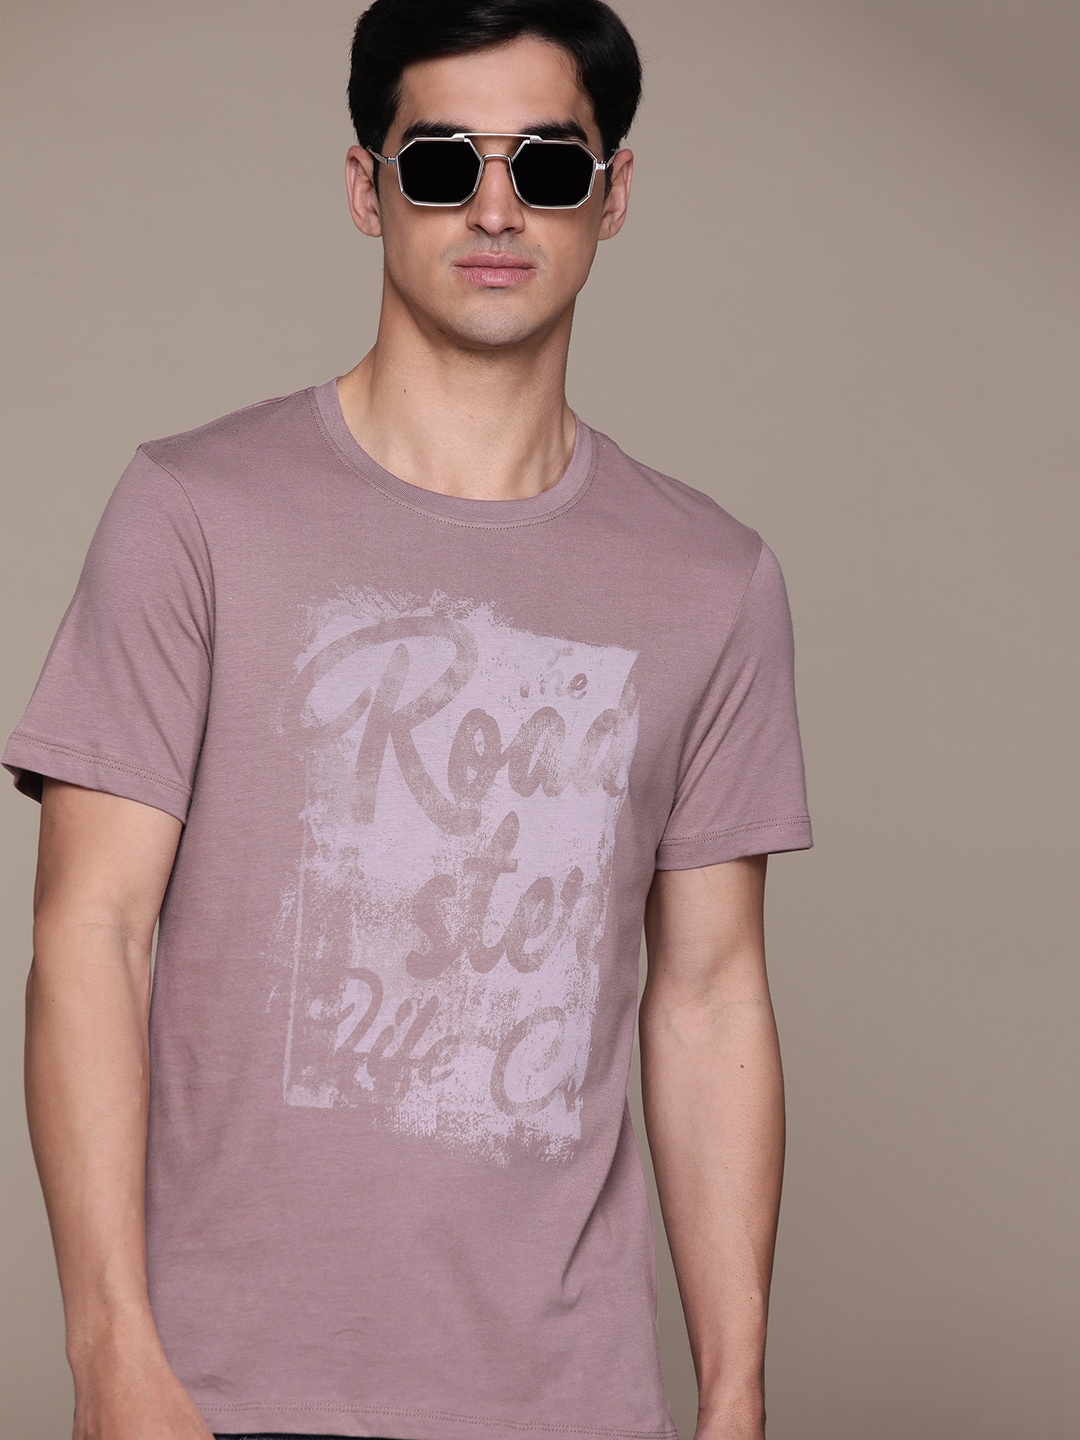 The Roadster Lifestyle Co. Brand Logo Print Pure Cotton T-shirt